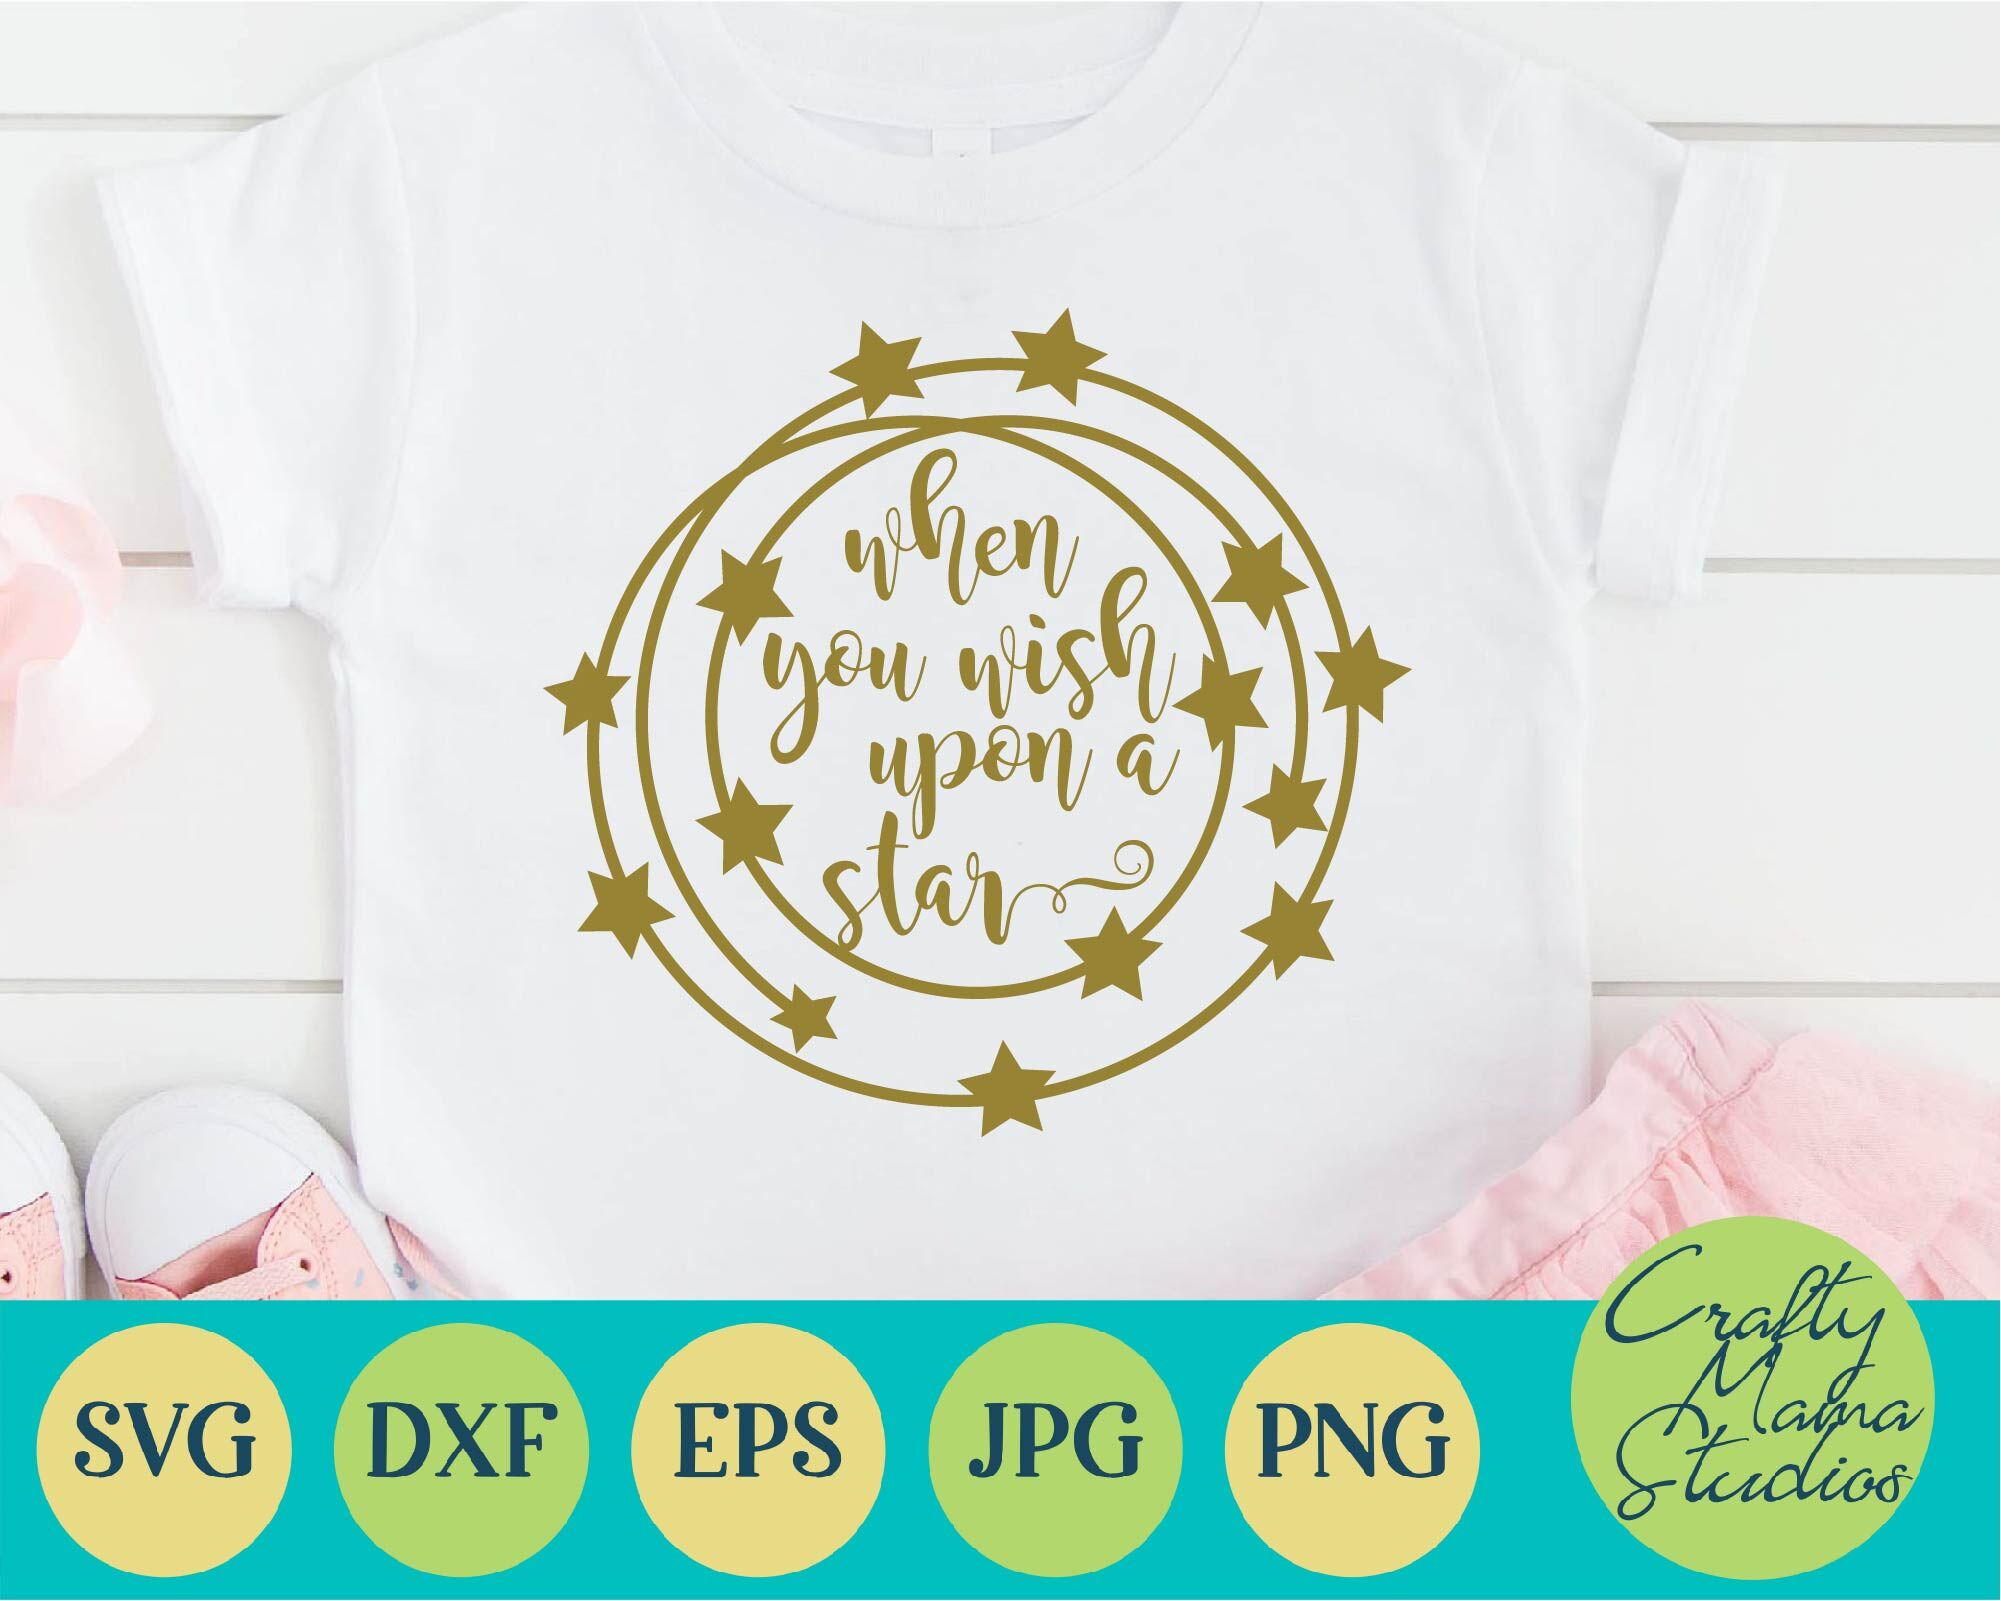 Inspirational Svg When You Wish Upon A Star Svg By Crafty Mama Studios Thehungryjpeg Com